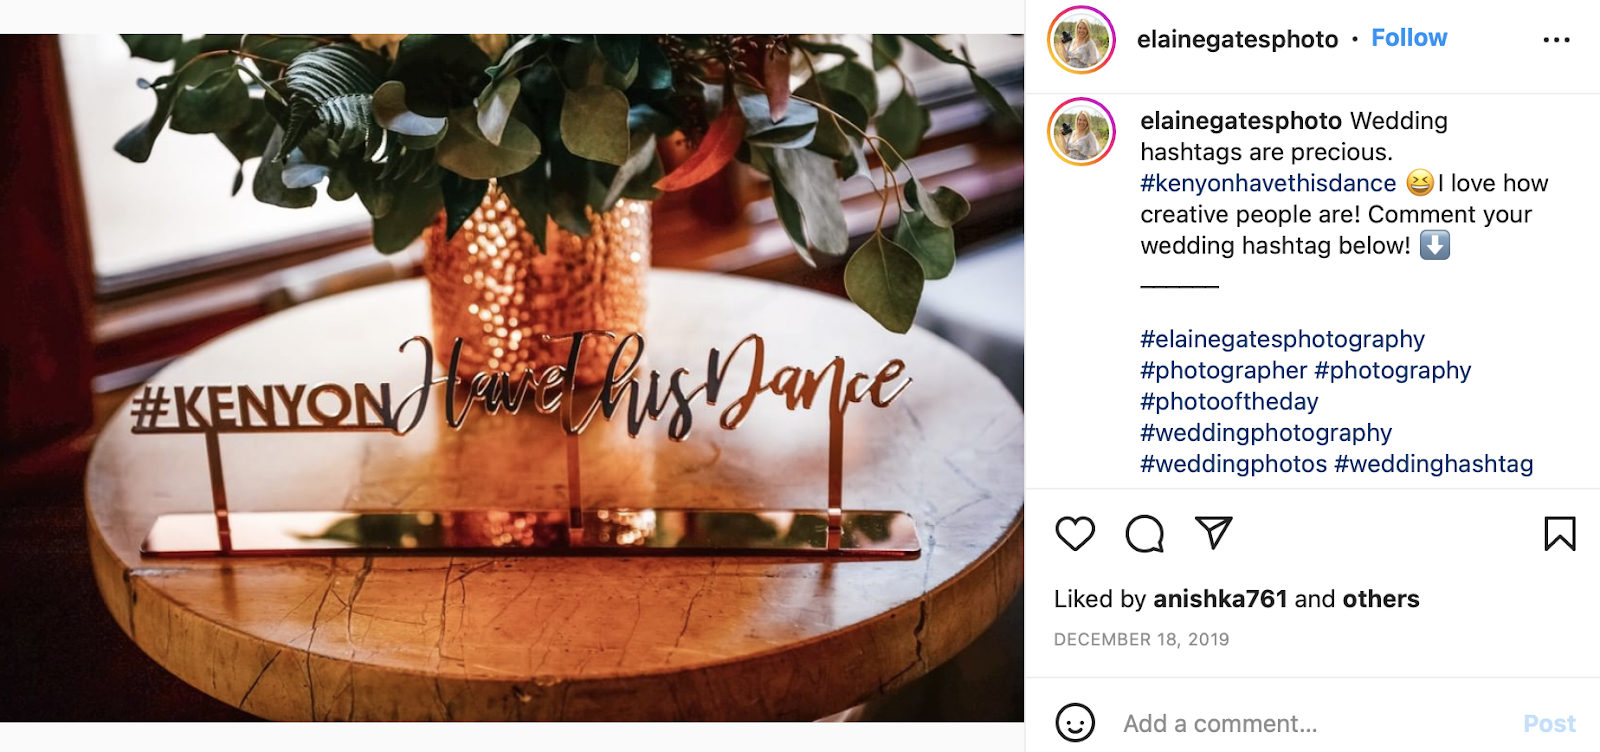 photo of wedding centerpiece with hashtag